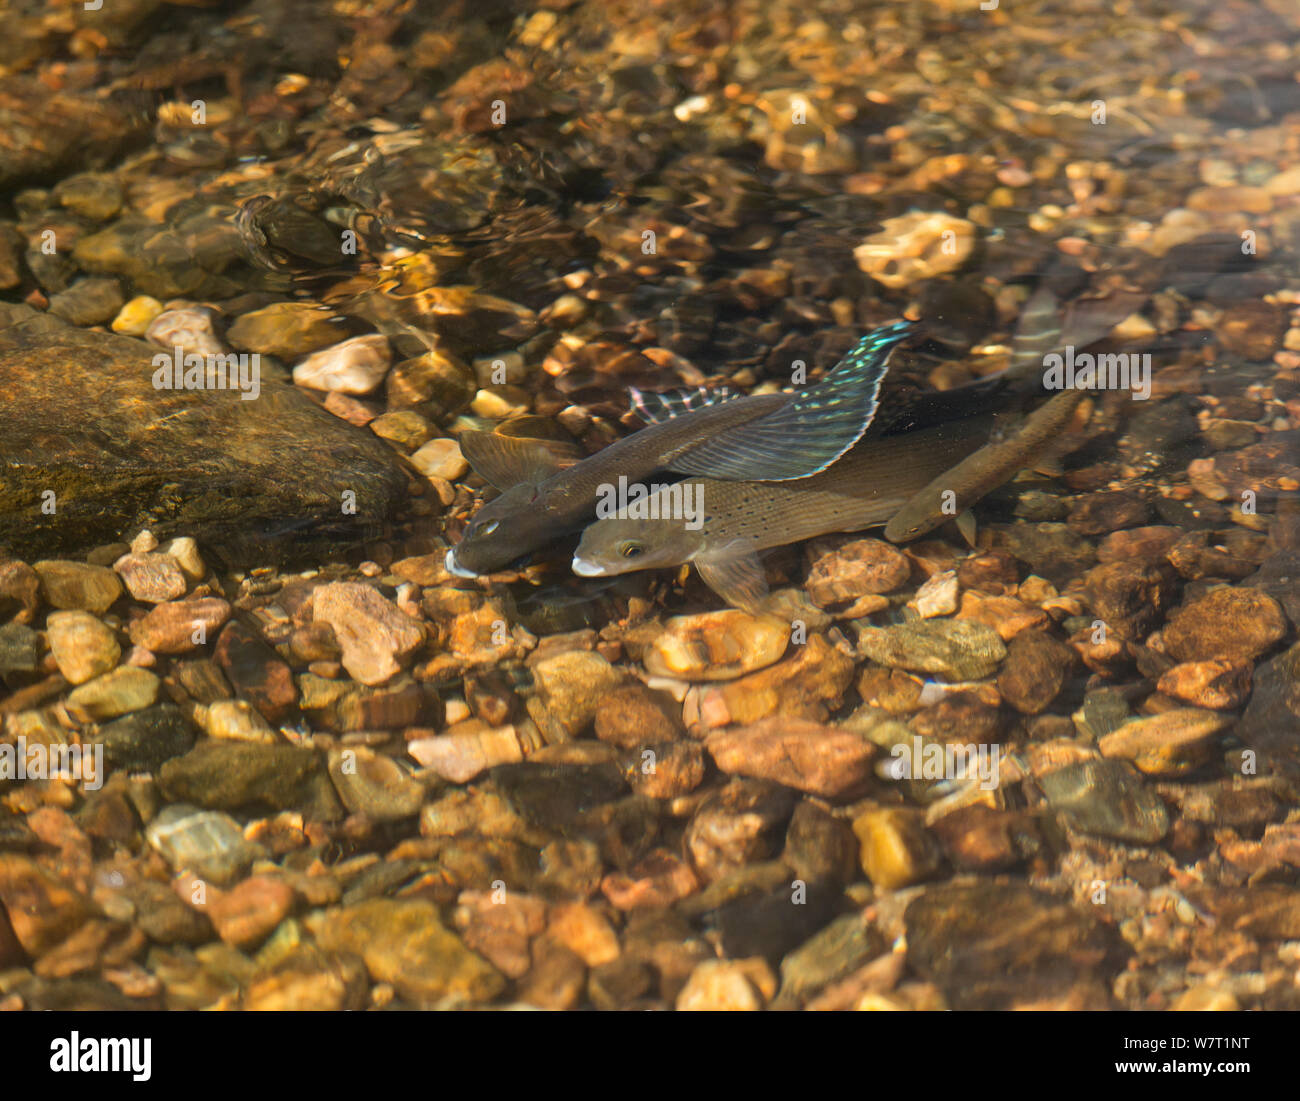 Male Arctic grayling (Thymallus arcticus) displaying to  a female, with a small Greenback cutthroat trout (Oncorhynchus clarki stomias) nearby, Colorado, USA, July. Stock Photo